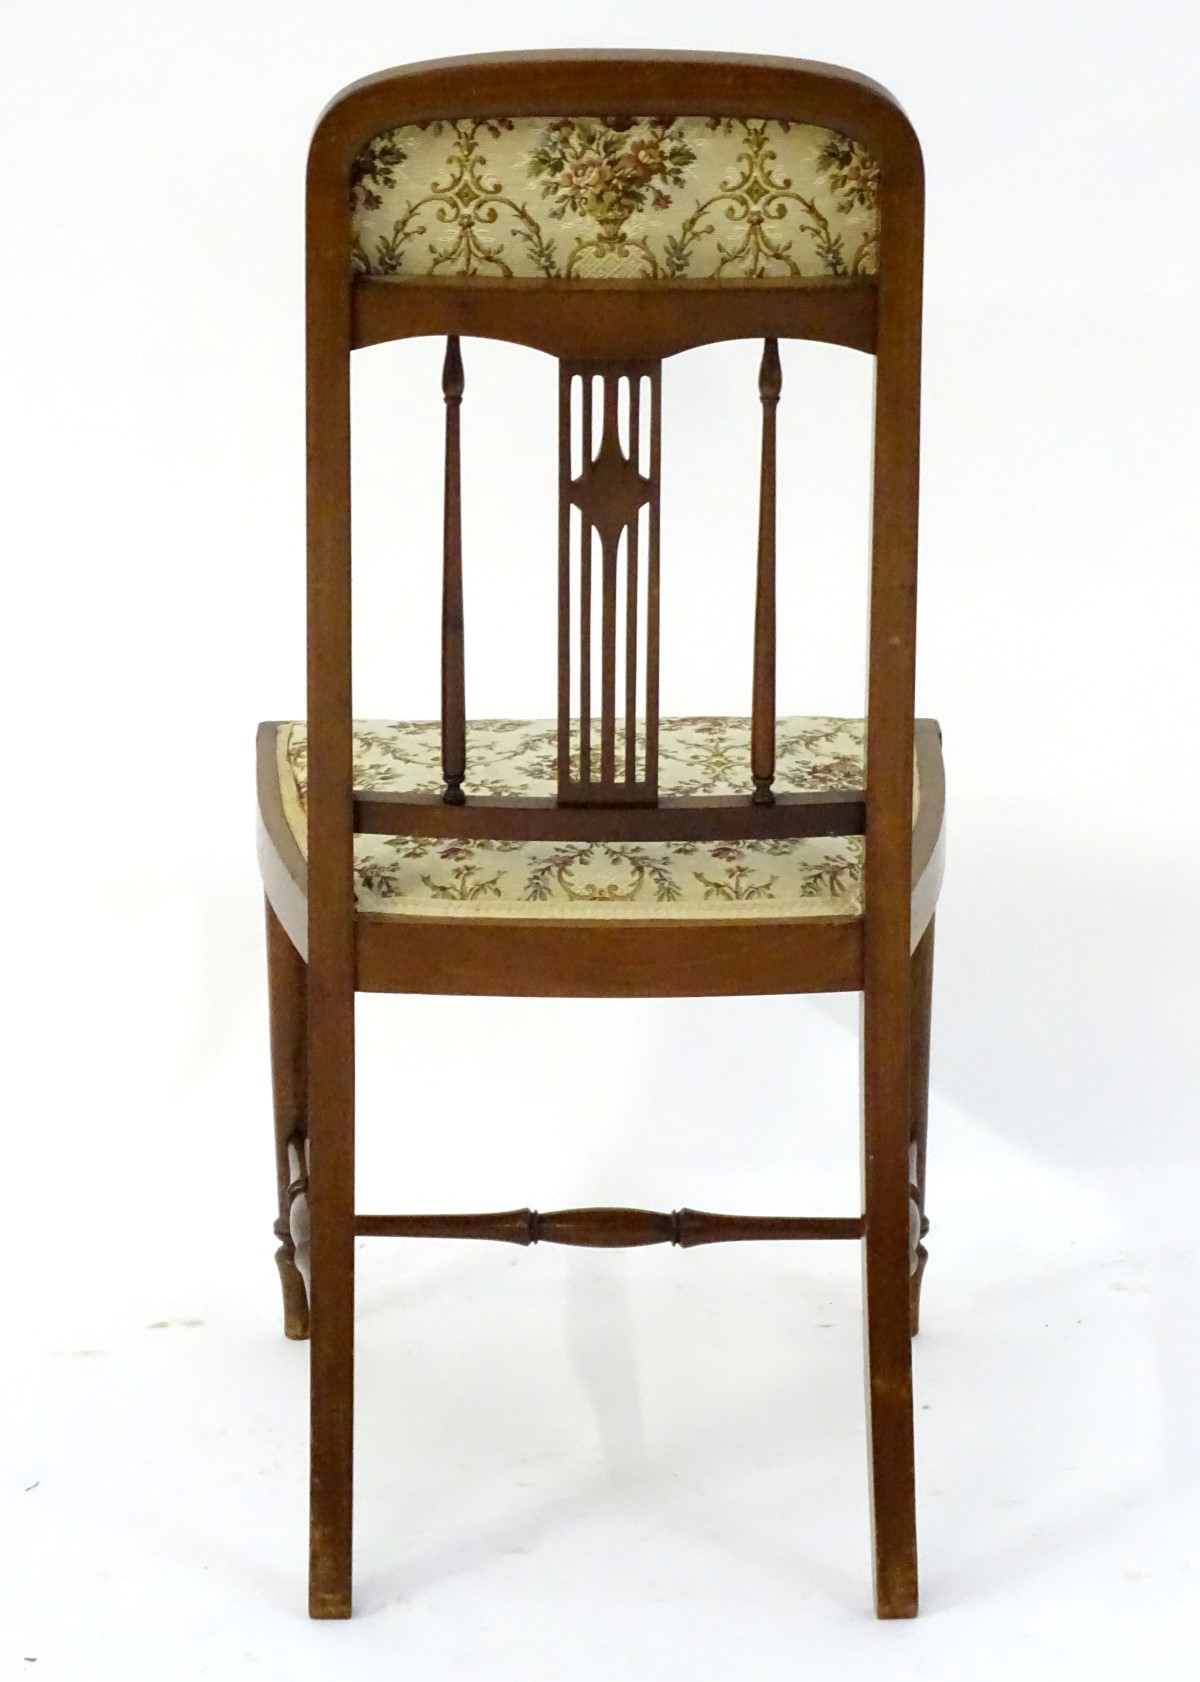 An early 20thC mahogany bedroom chair with a slatted backrest and inlaid decoration, - Image 7 of 9